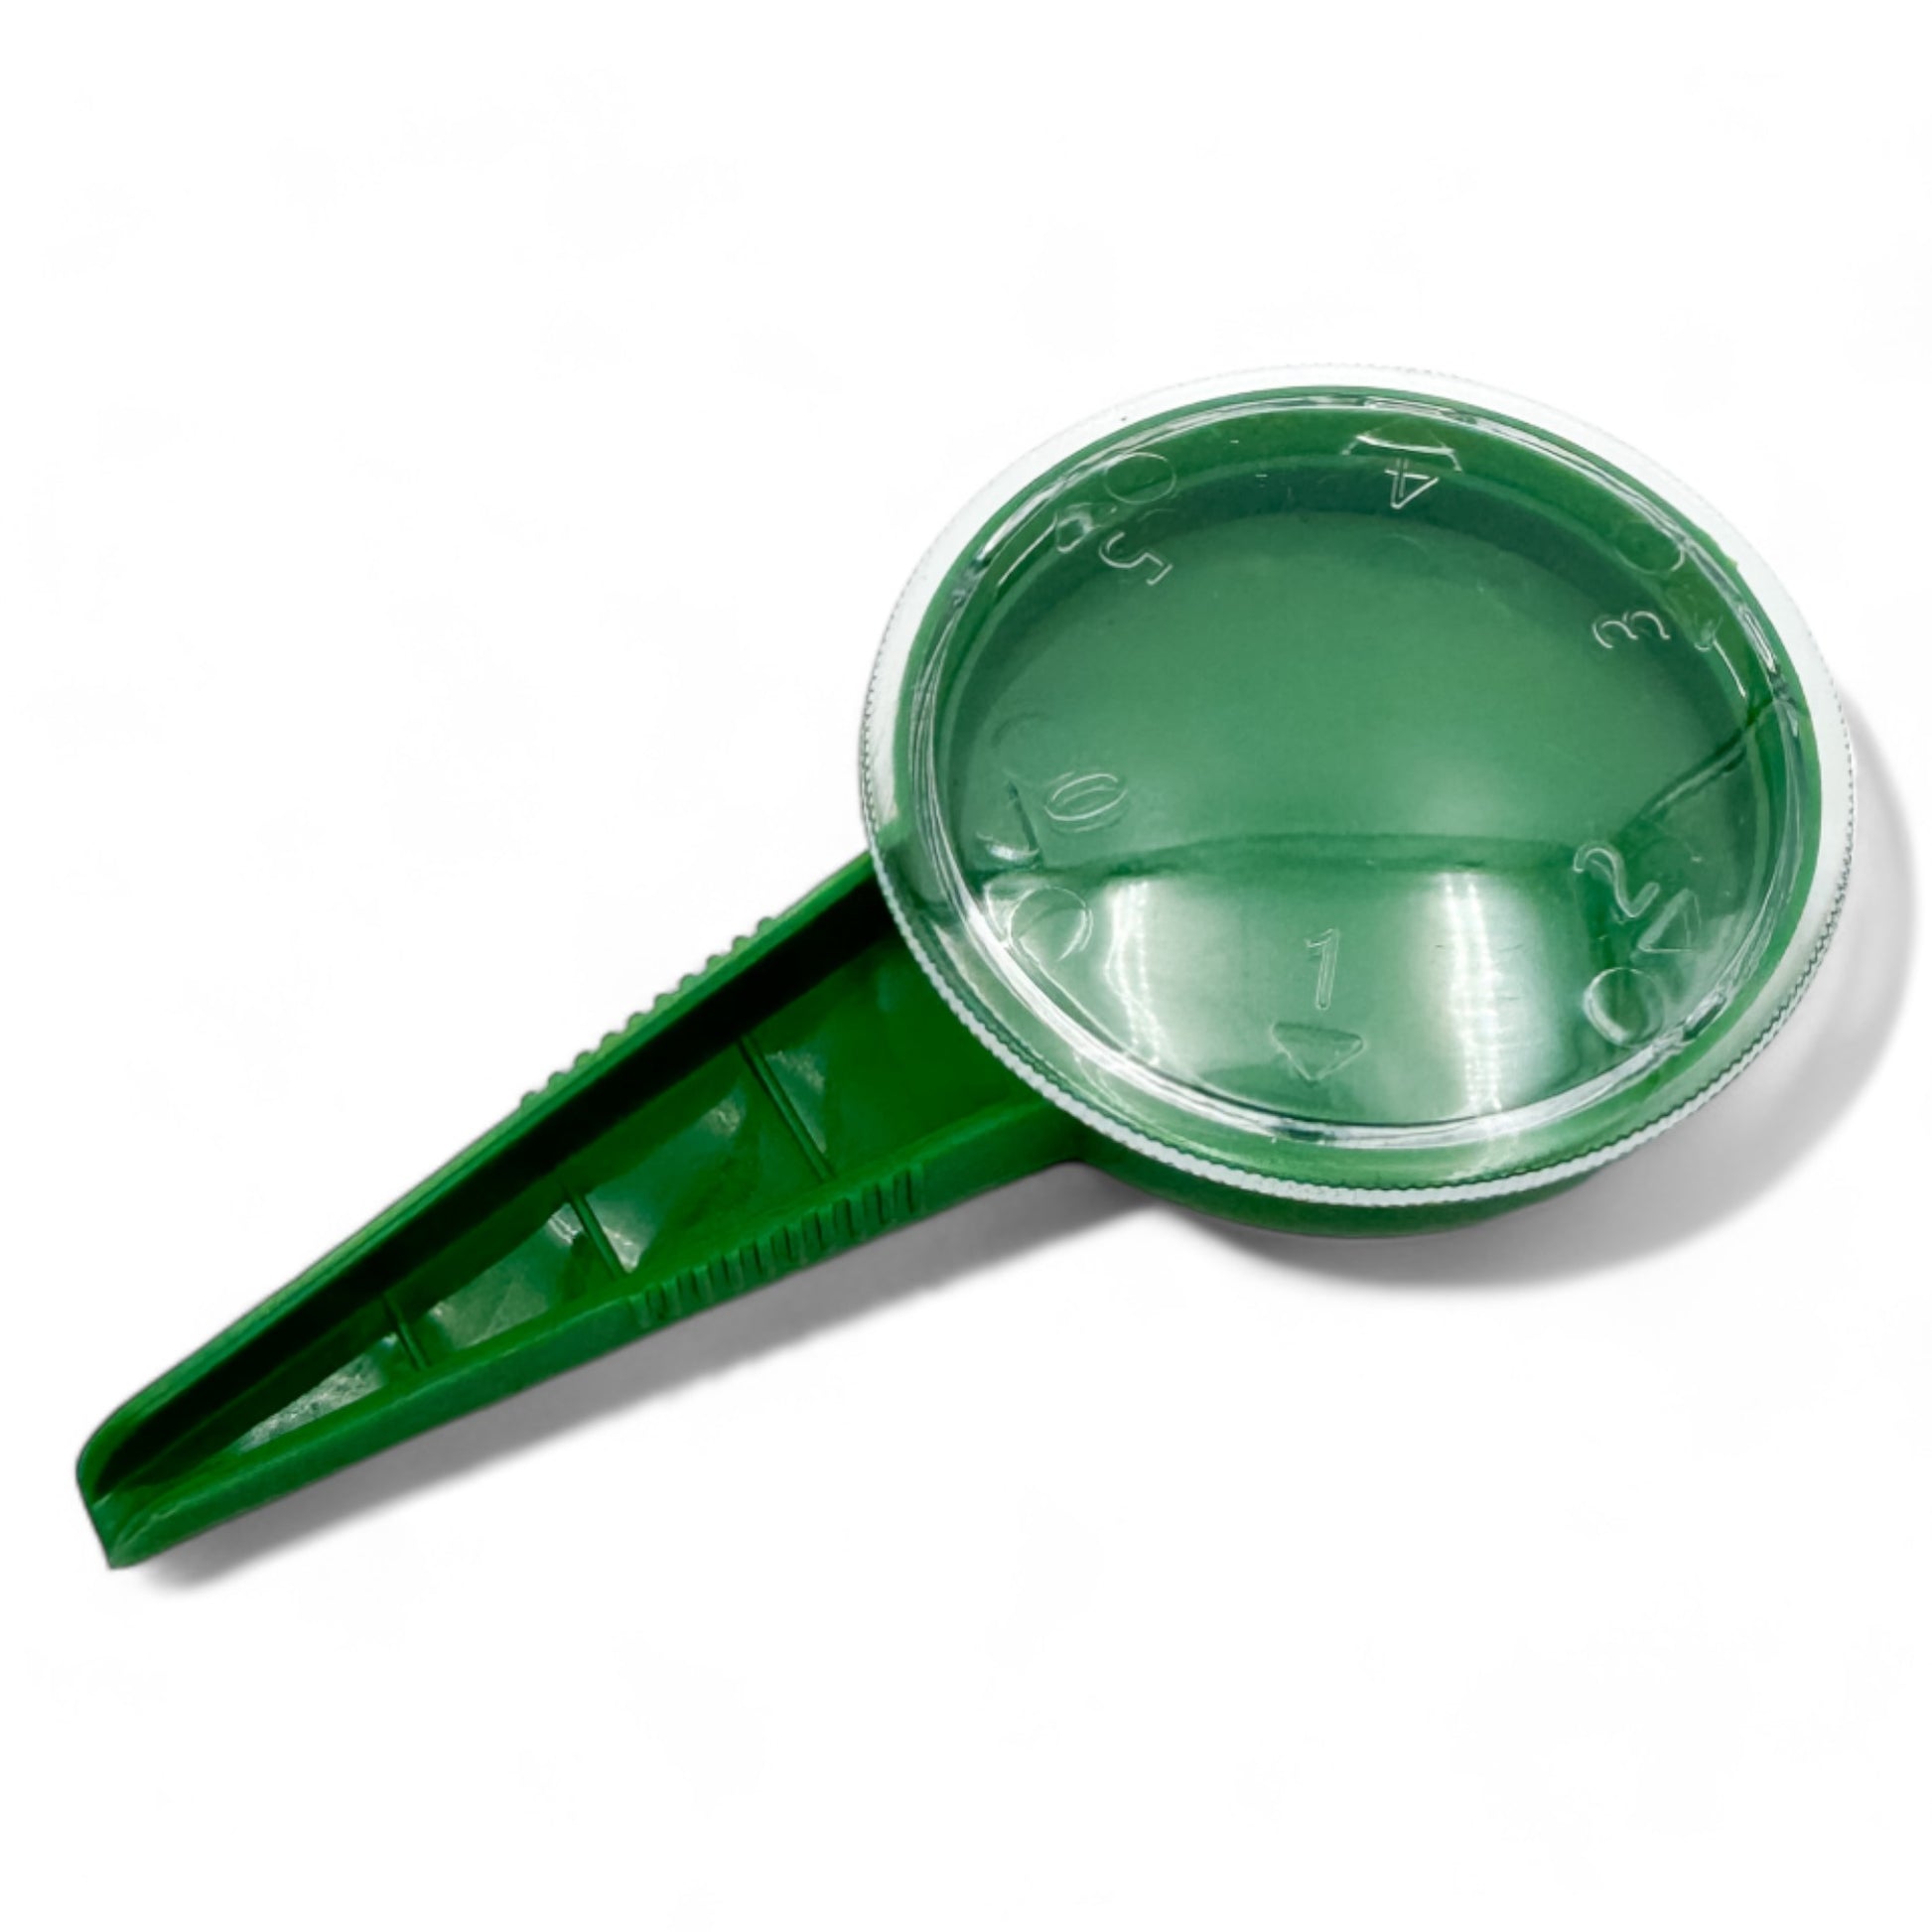 Handheld seed dispenser in green with closed lid